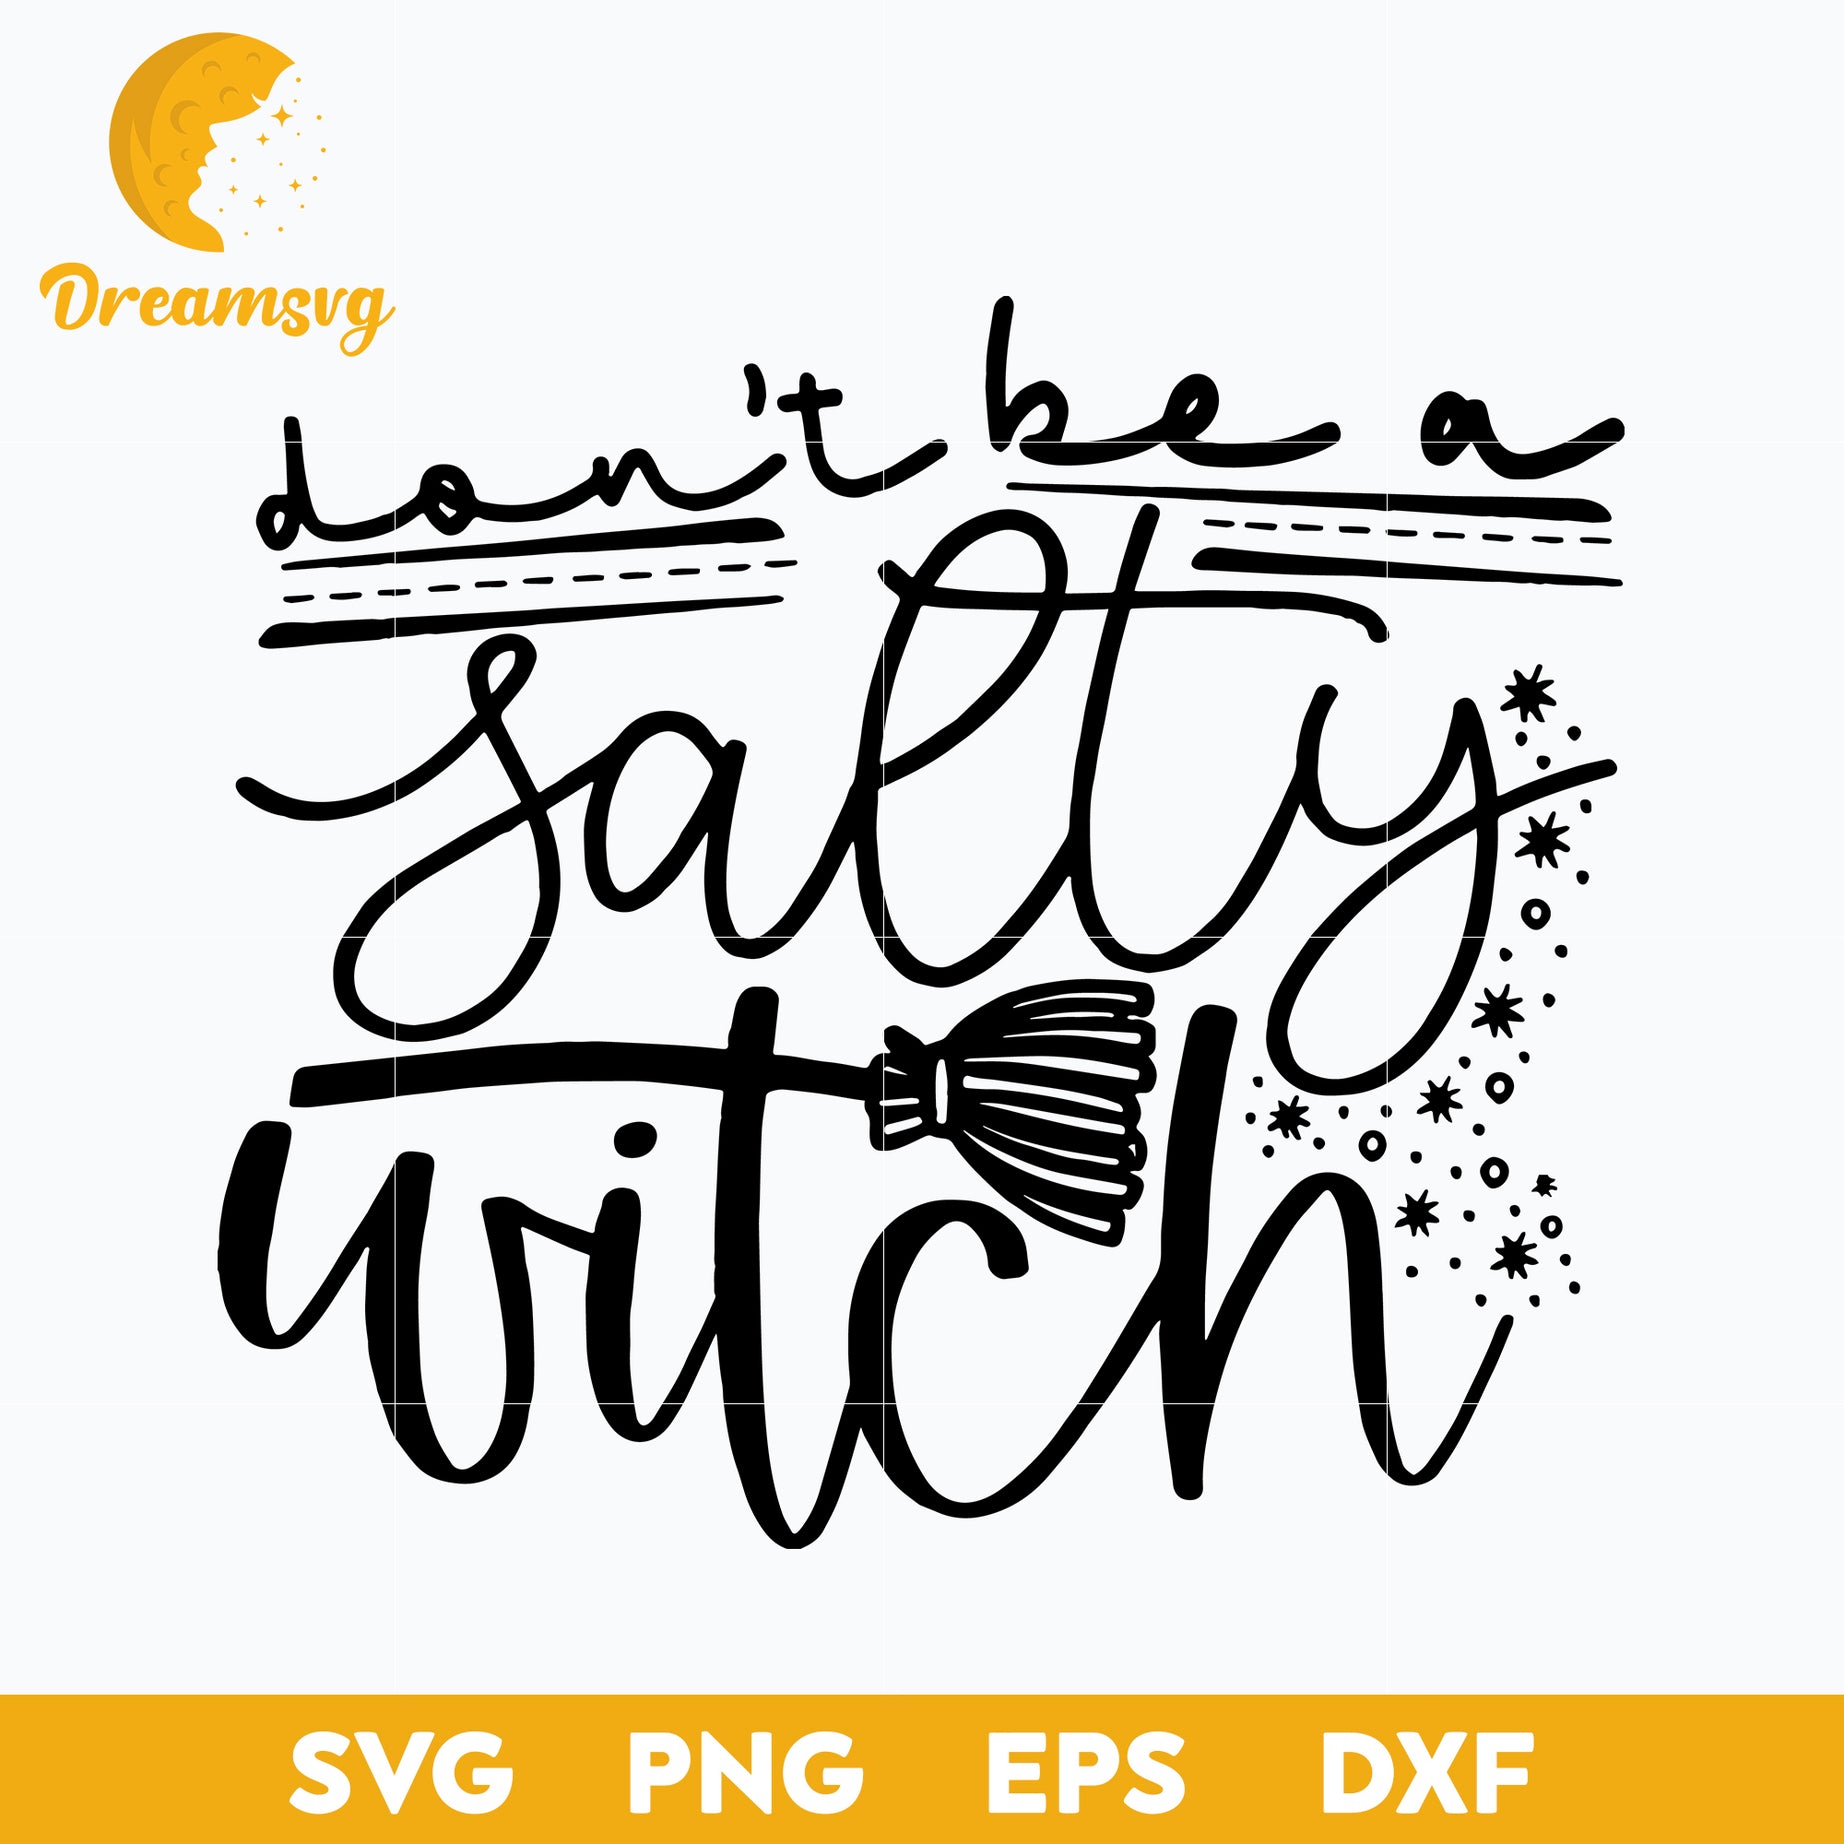 Don't Be A Salty Witch Quotes svg, Halloween svg, png, dxf, eps digital file.